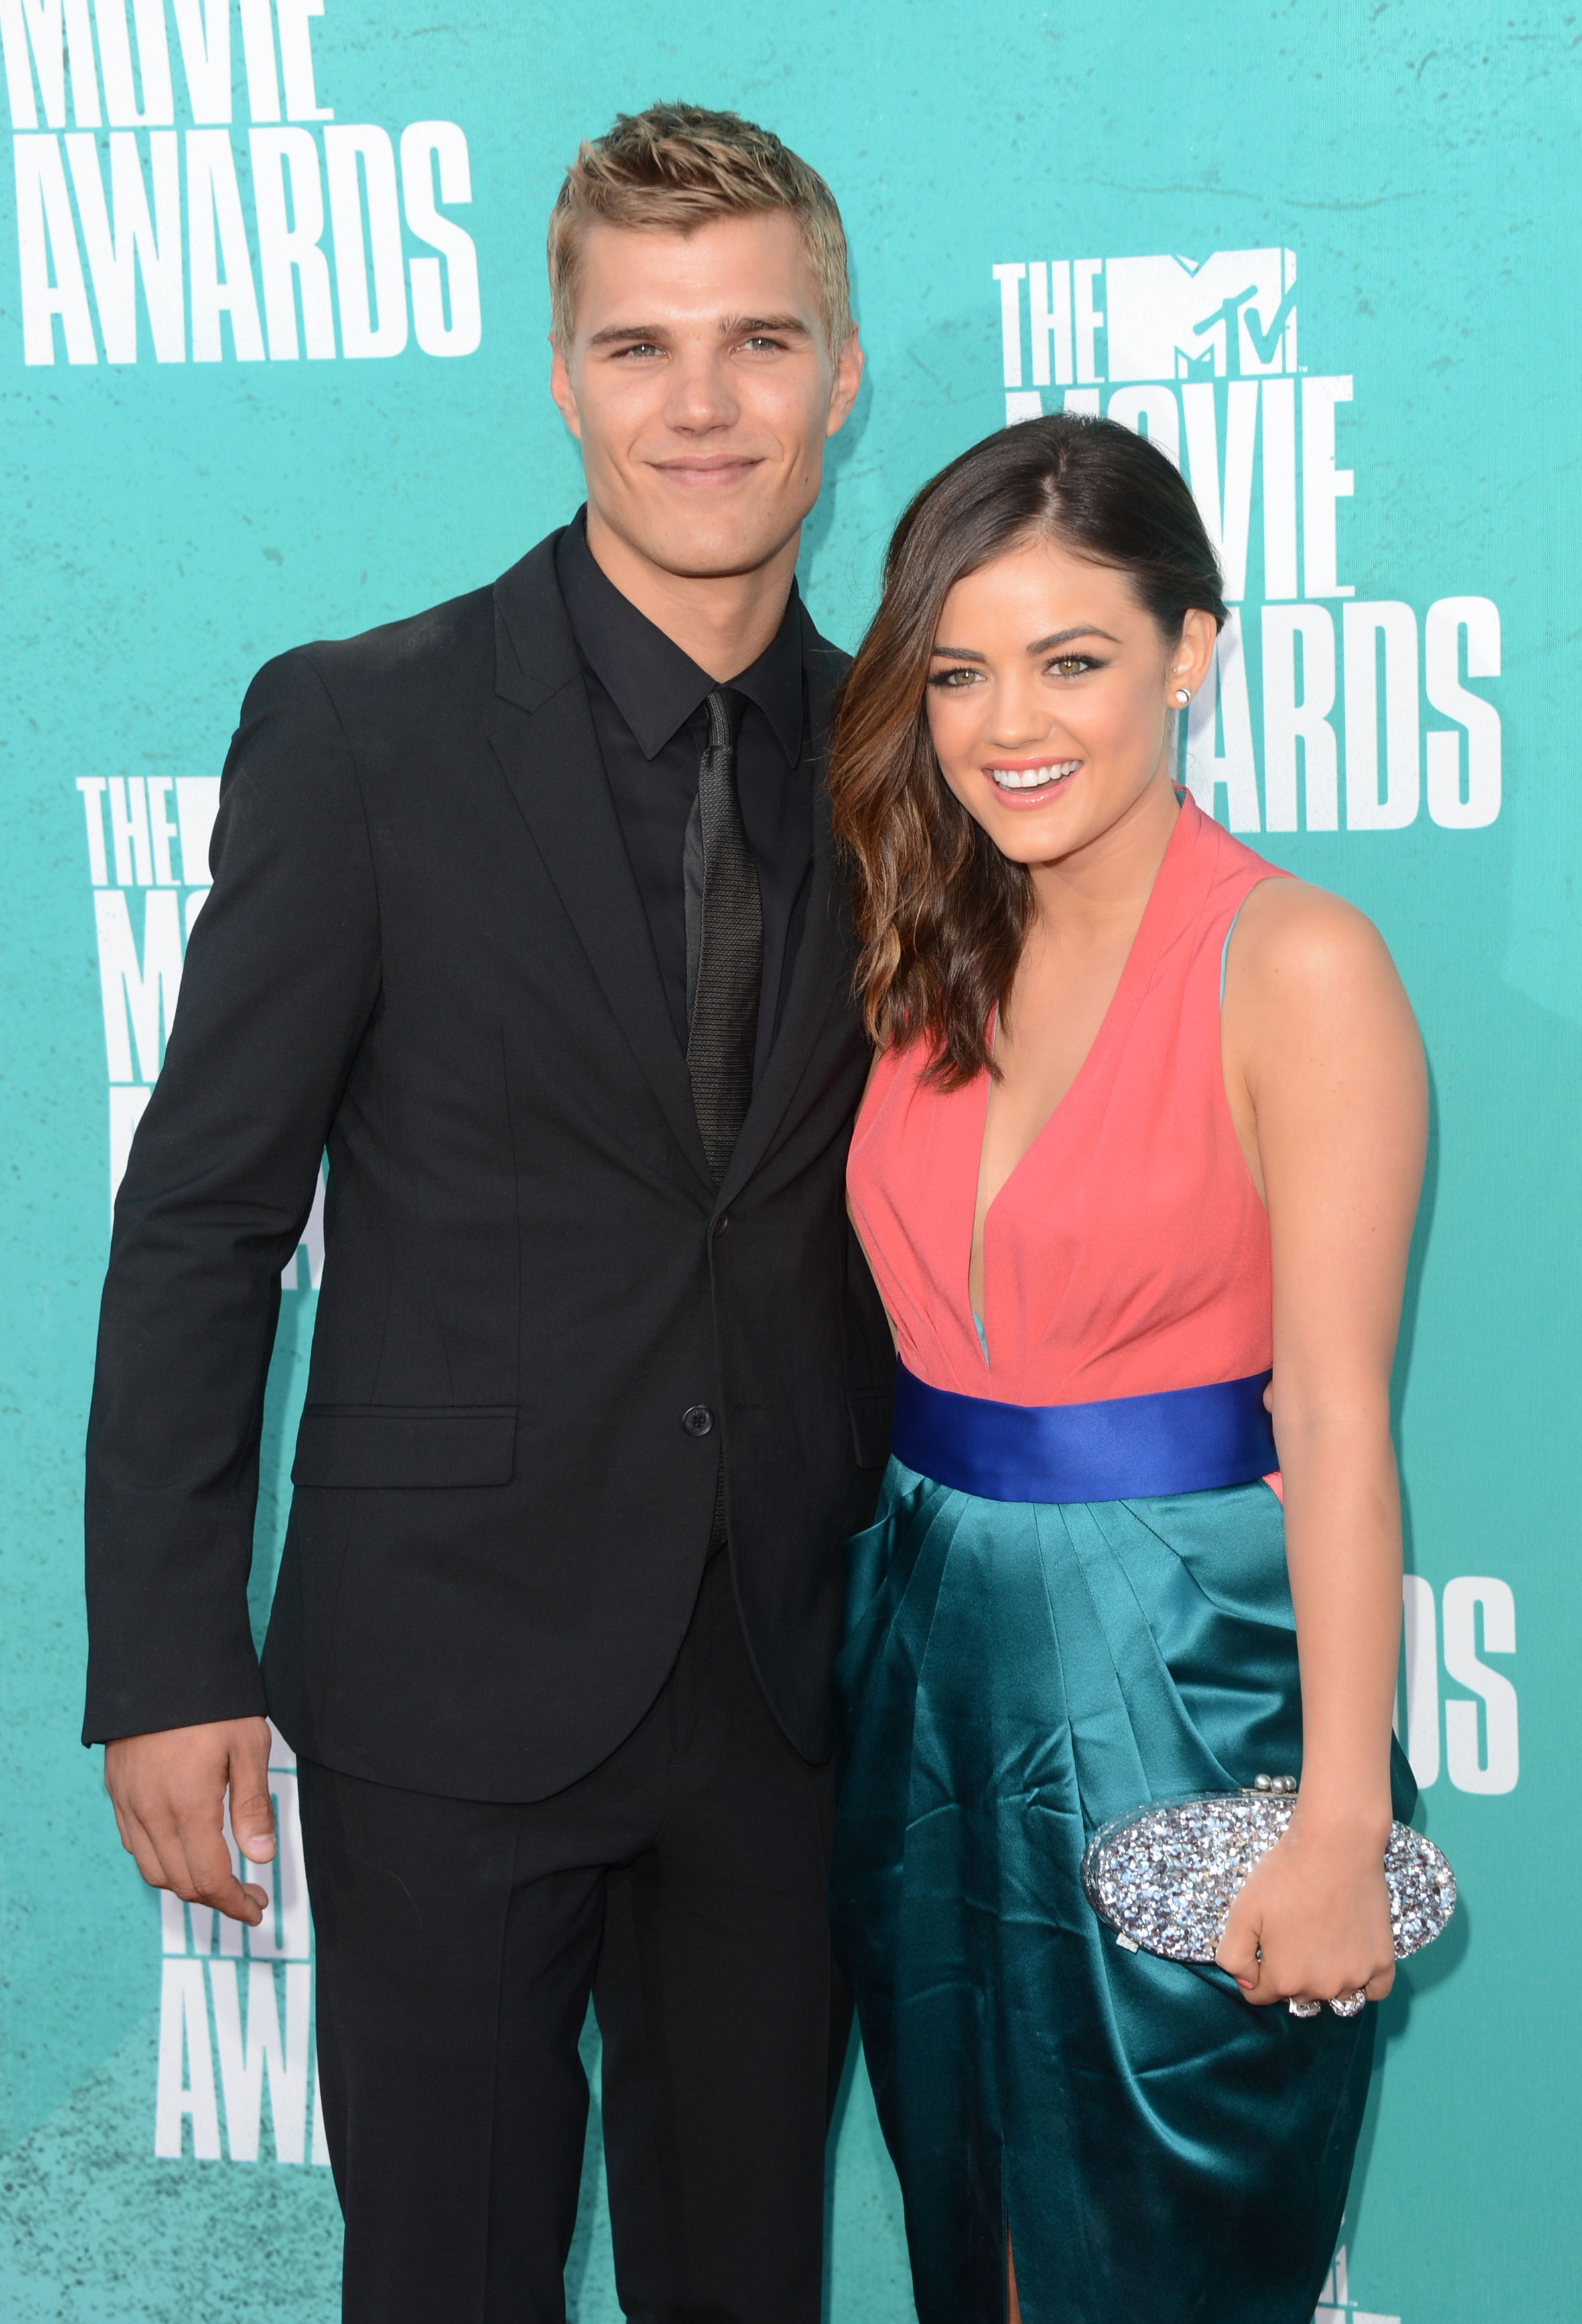 Chris Zylka and Lucy Hale at the 2012 MTV Movie Awards held at Gibson Amphitheatre on June 3, 2012, in Universal City, California